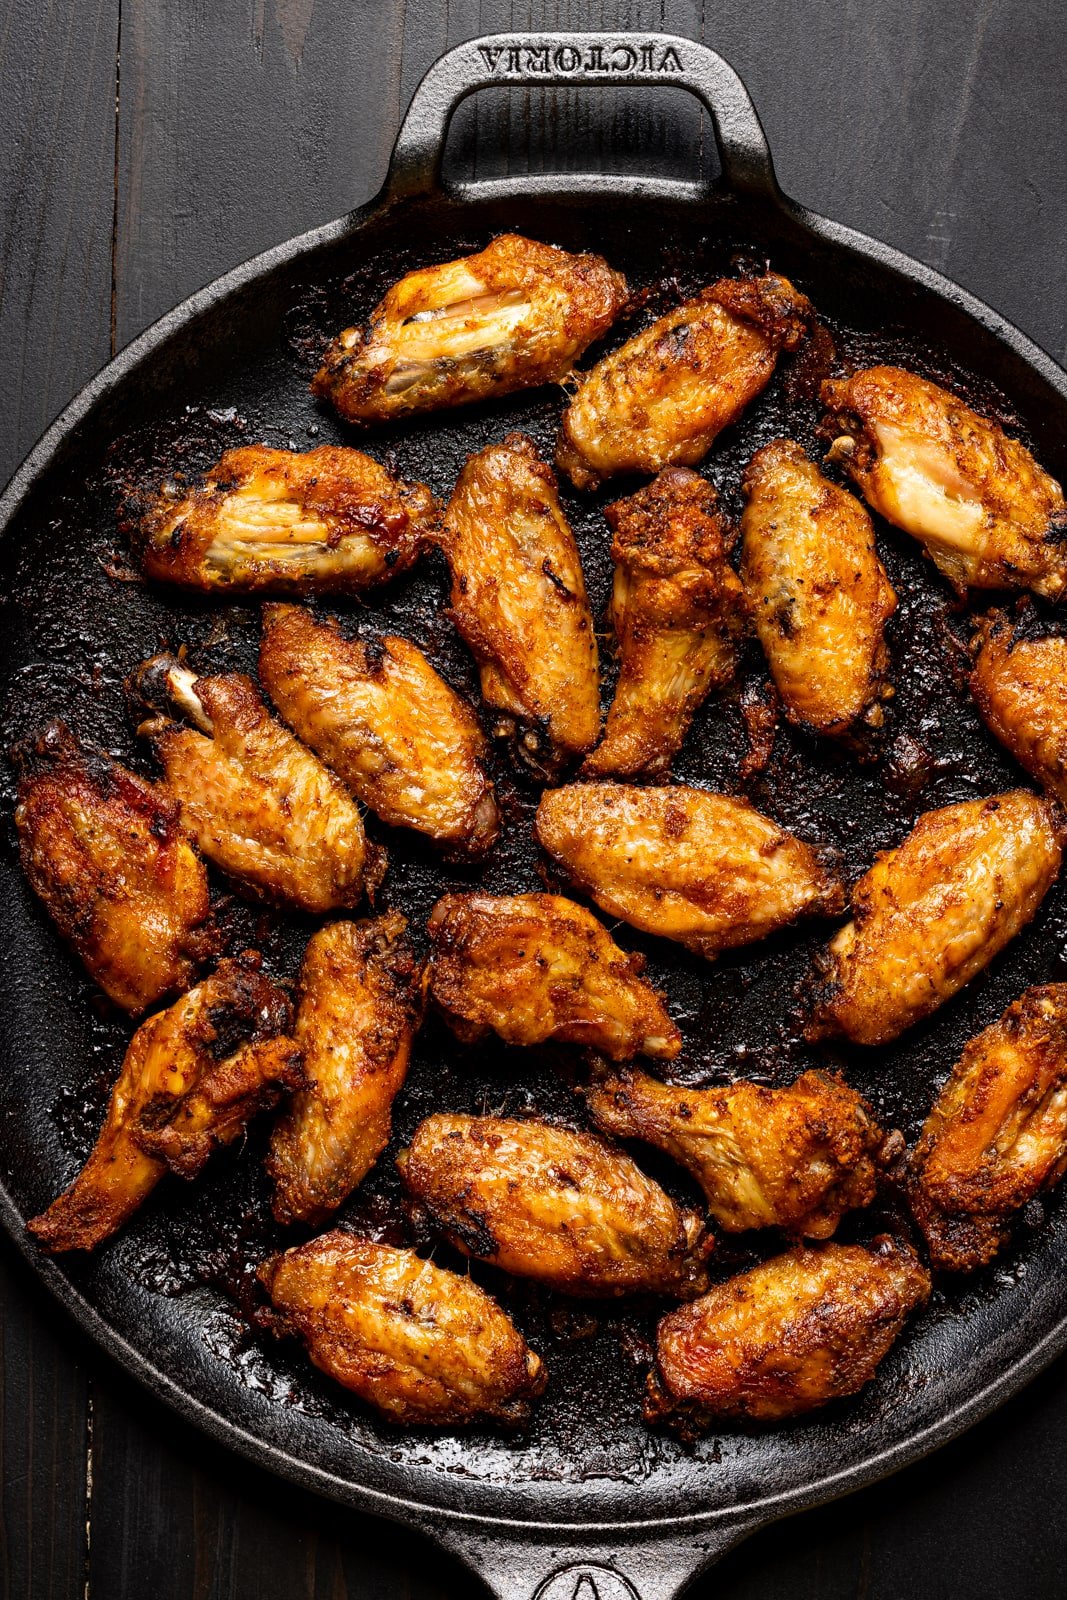 Baked wings on a black skillet.